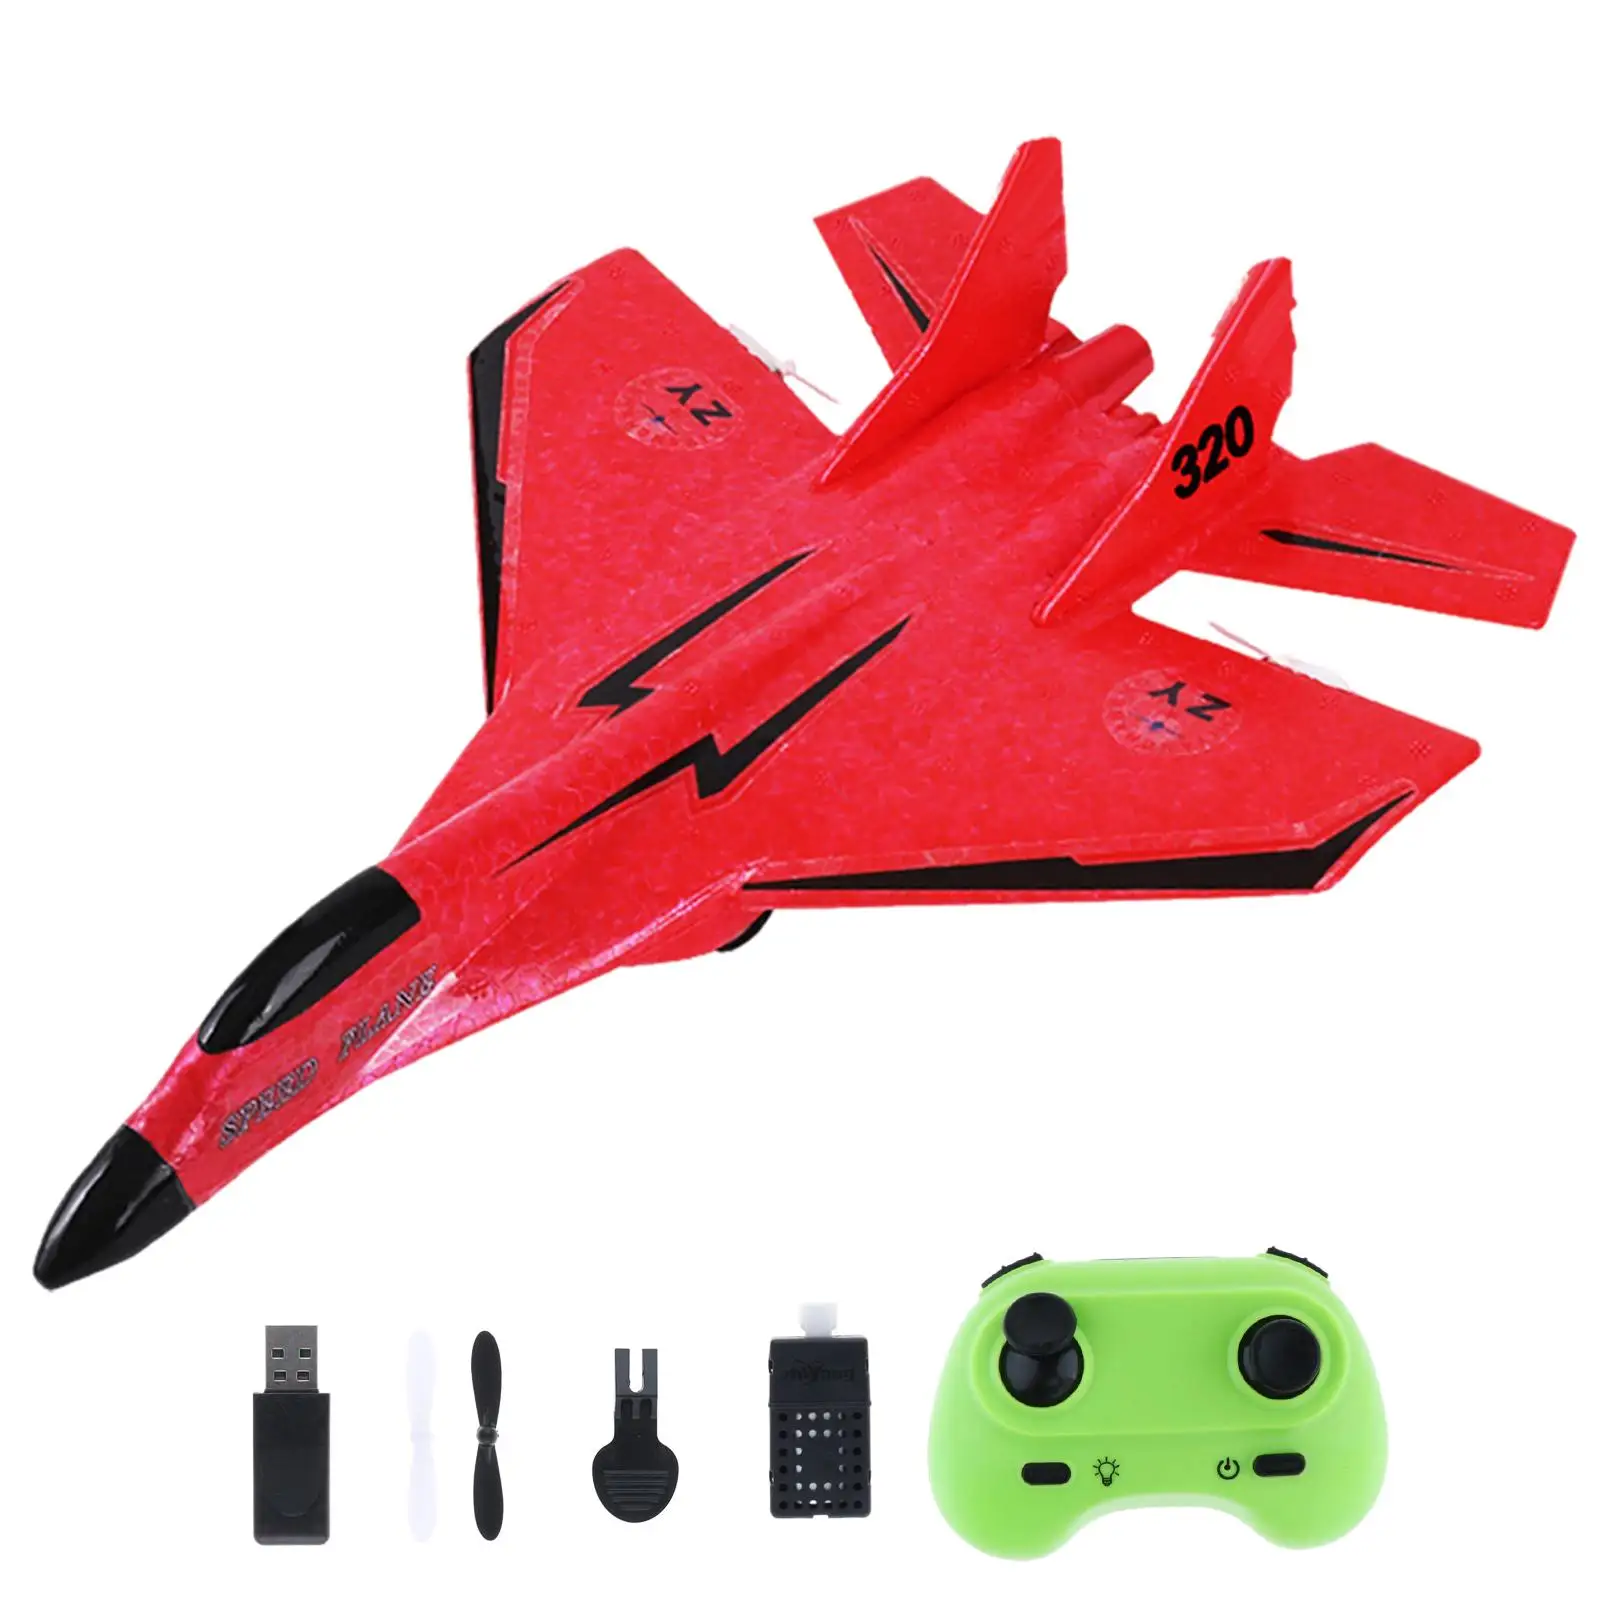 2 CH RC Plane Gift 2.4G Easy to Control RC Glider Foam RC Airplane Remote Control Airplane for Adults Kids Beginner Boys Girls